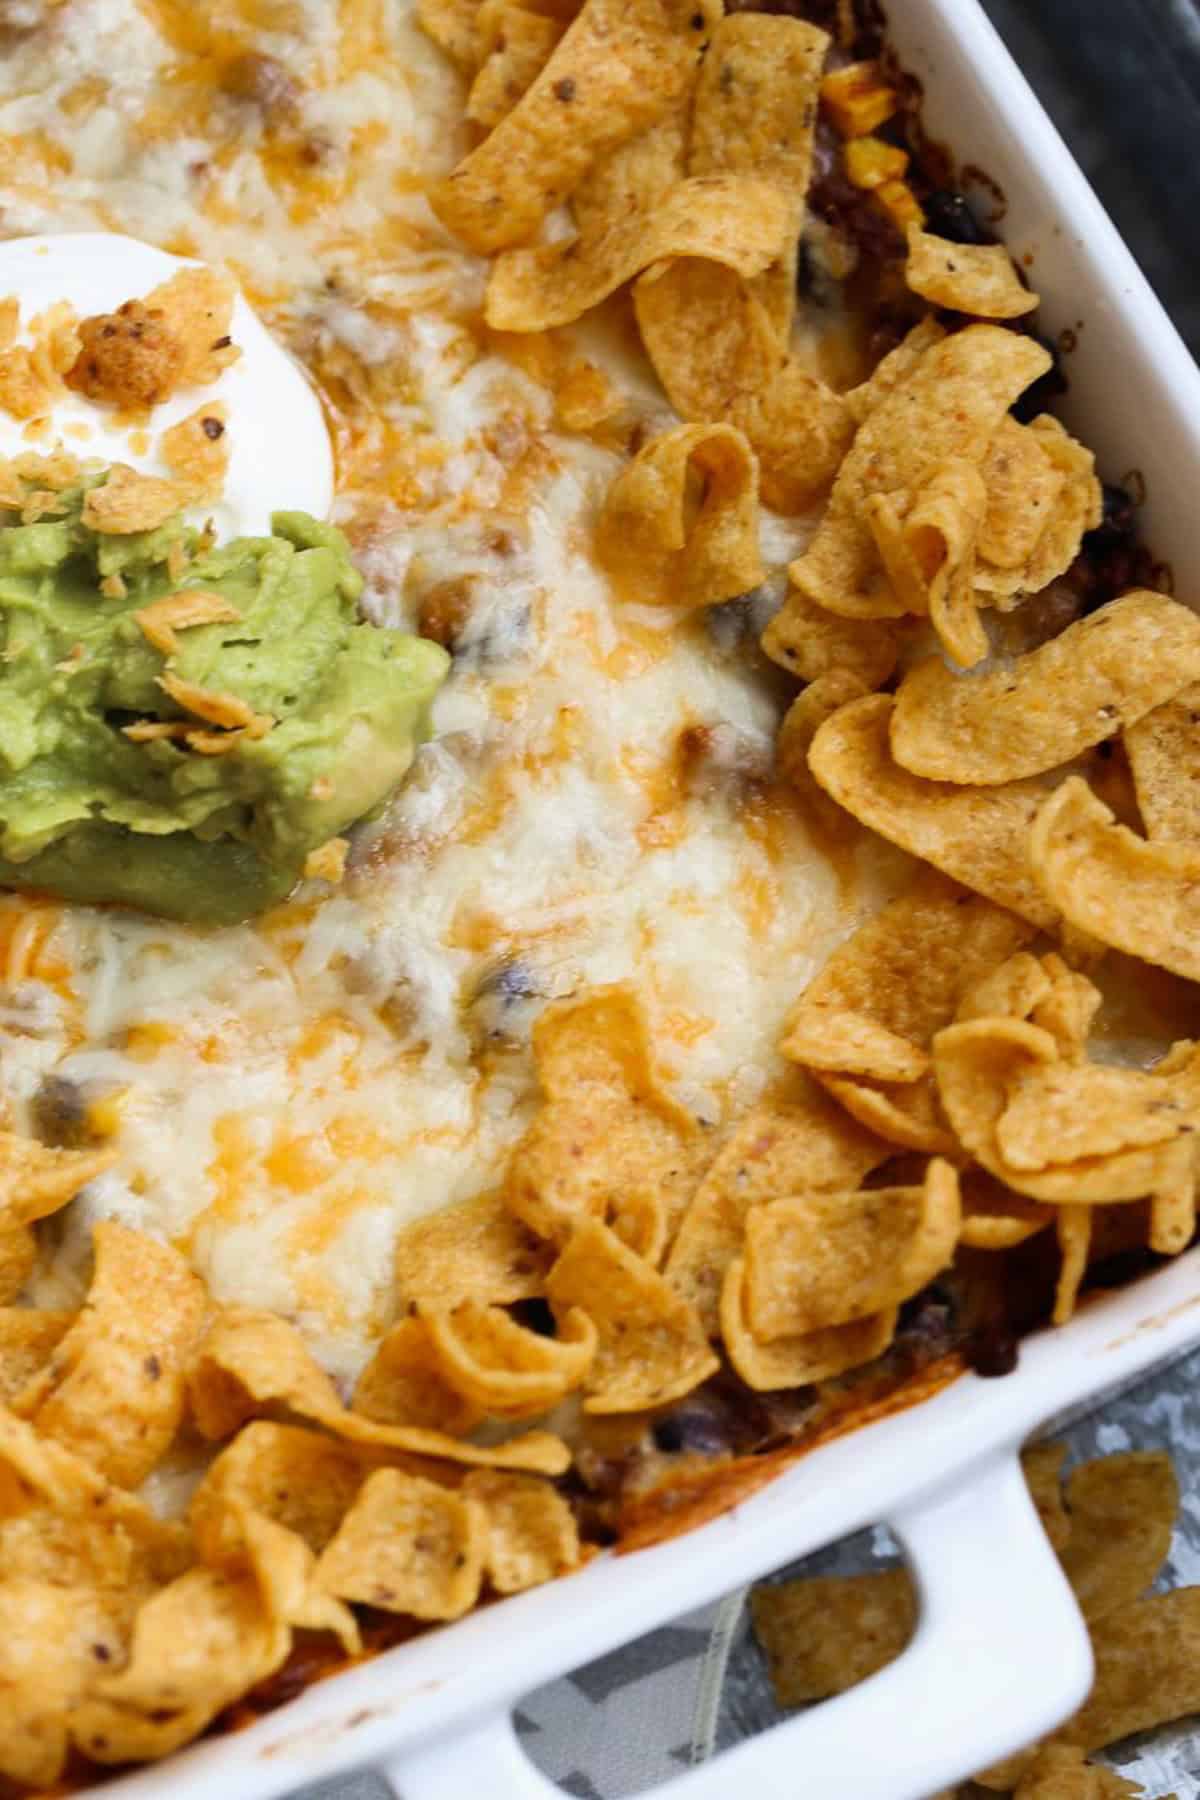 Overhead view of Frito pie in a 9x13 baking dish, topped with dollops of sour cream and guacamole.